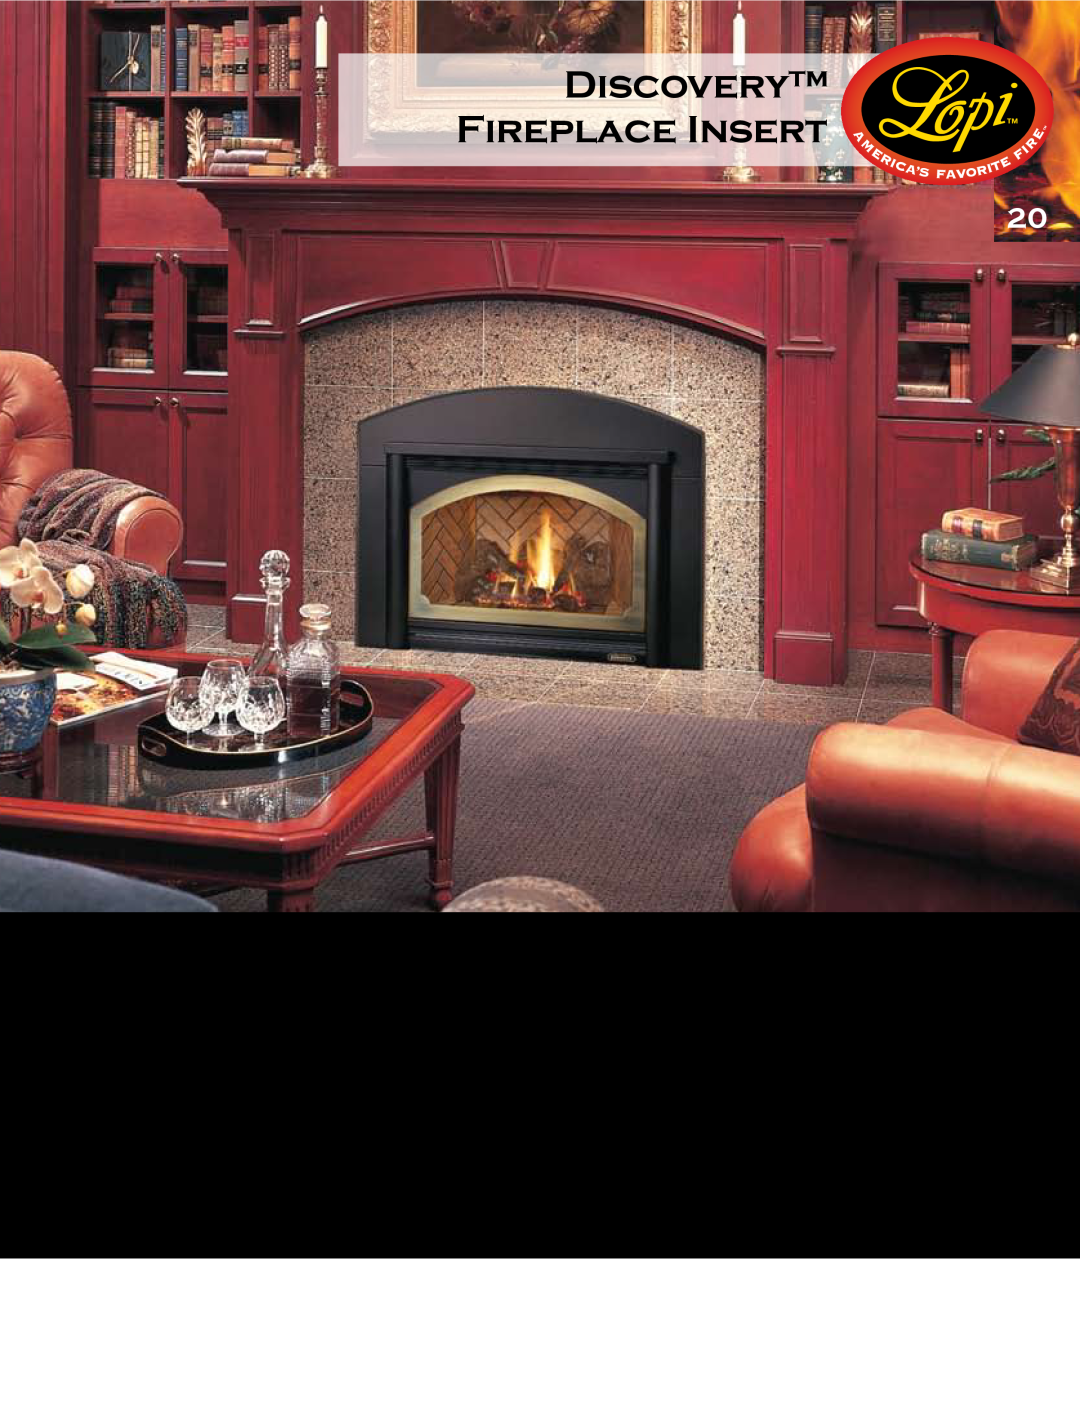 Lopi Gas Stove And Fireplace manual Discovery Fireplace Insert 